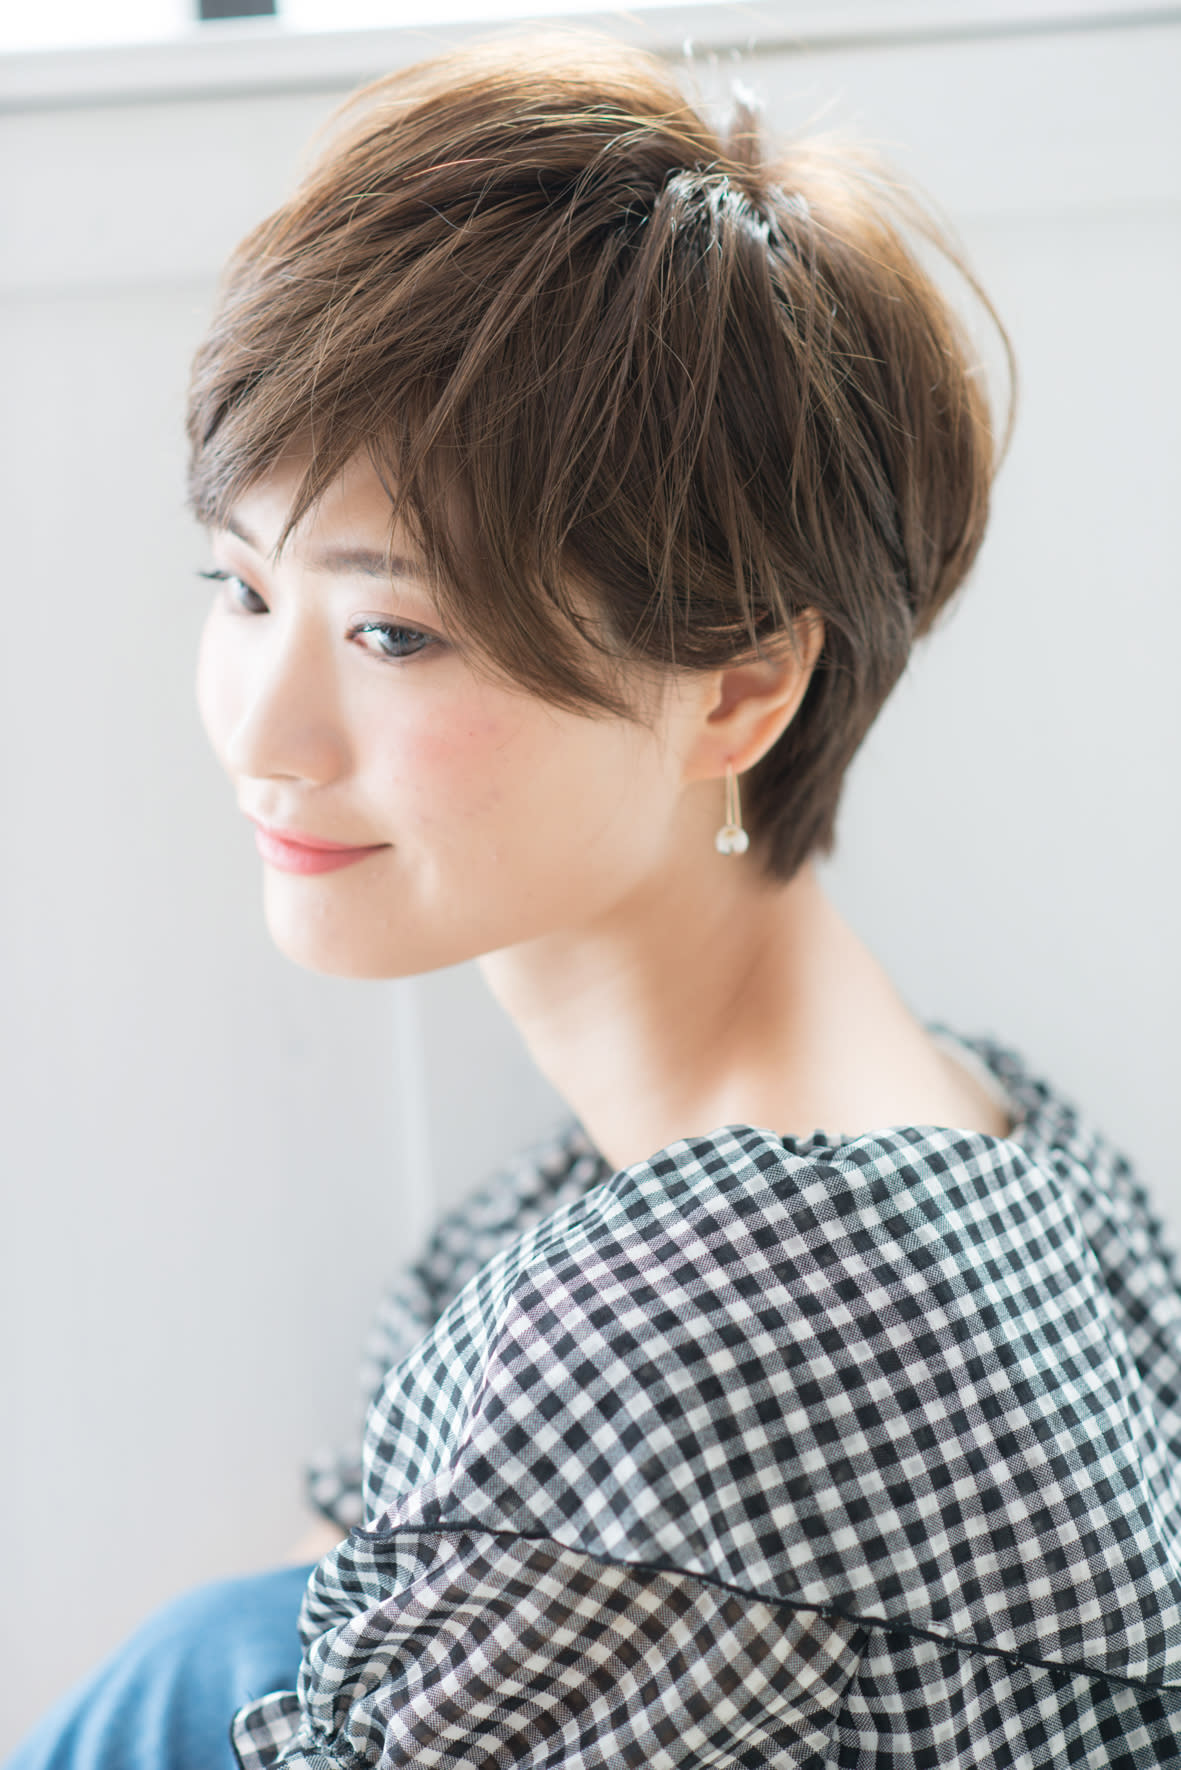 le a【レア】のスタイル紹介。【ヘアーズクルー城南店】style3